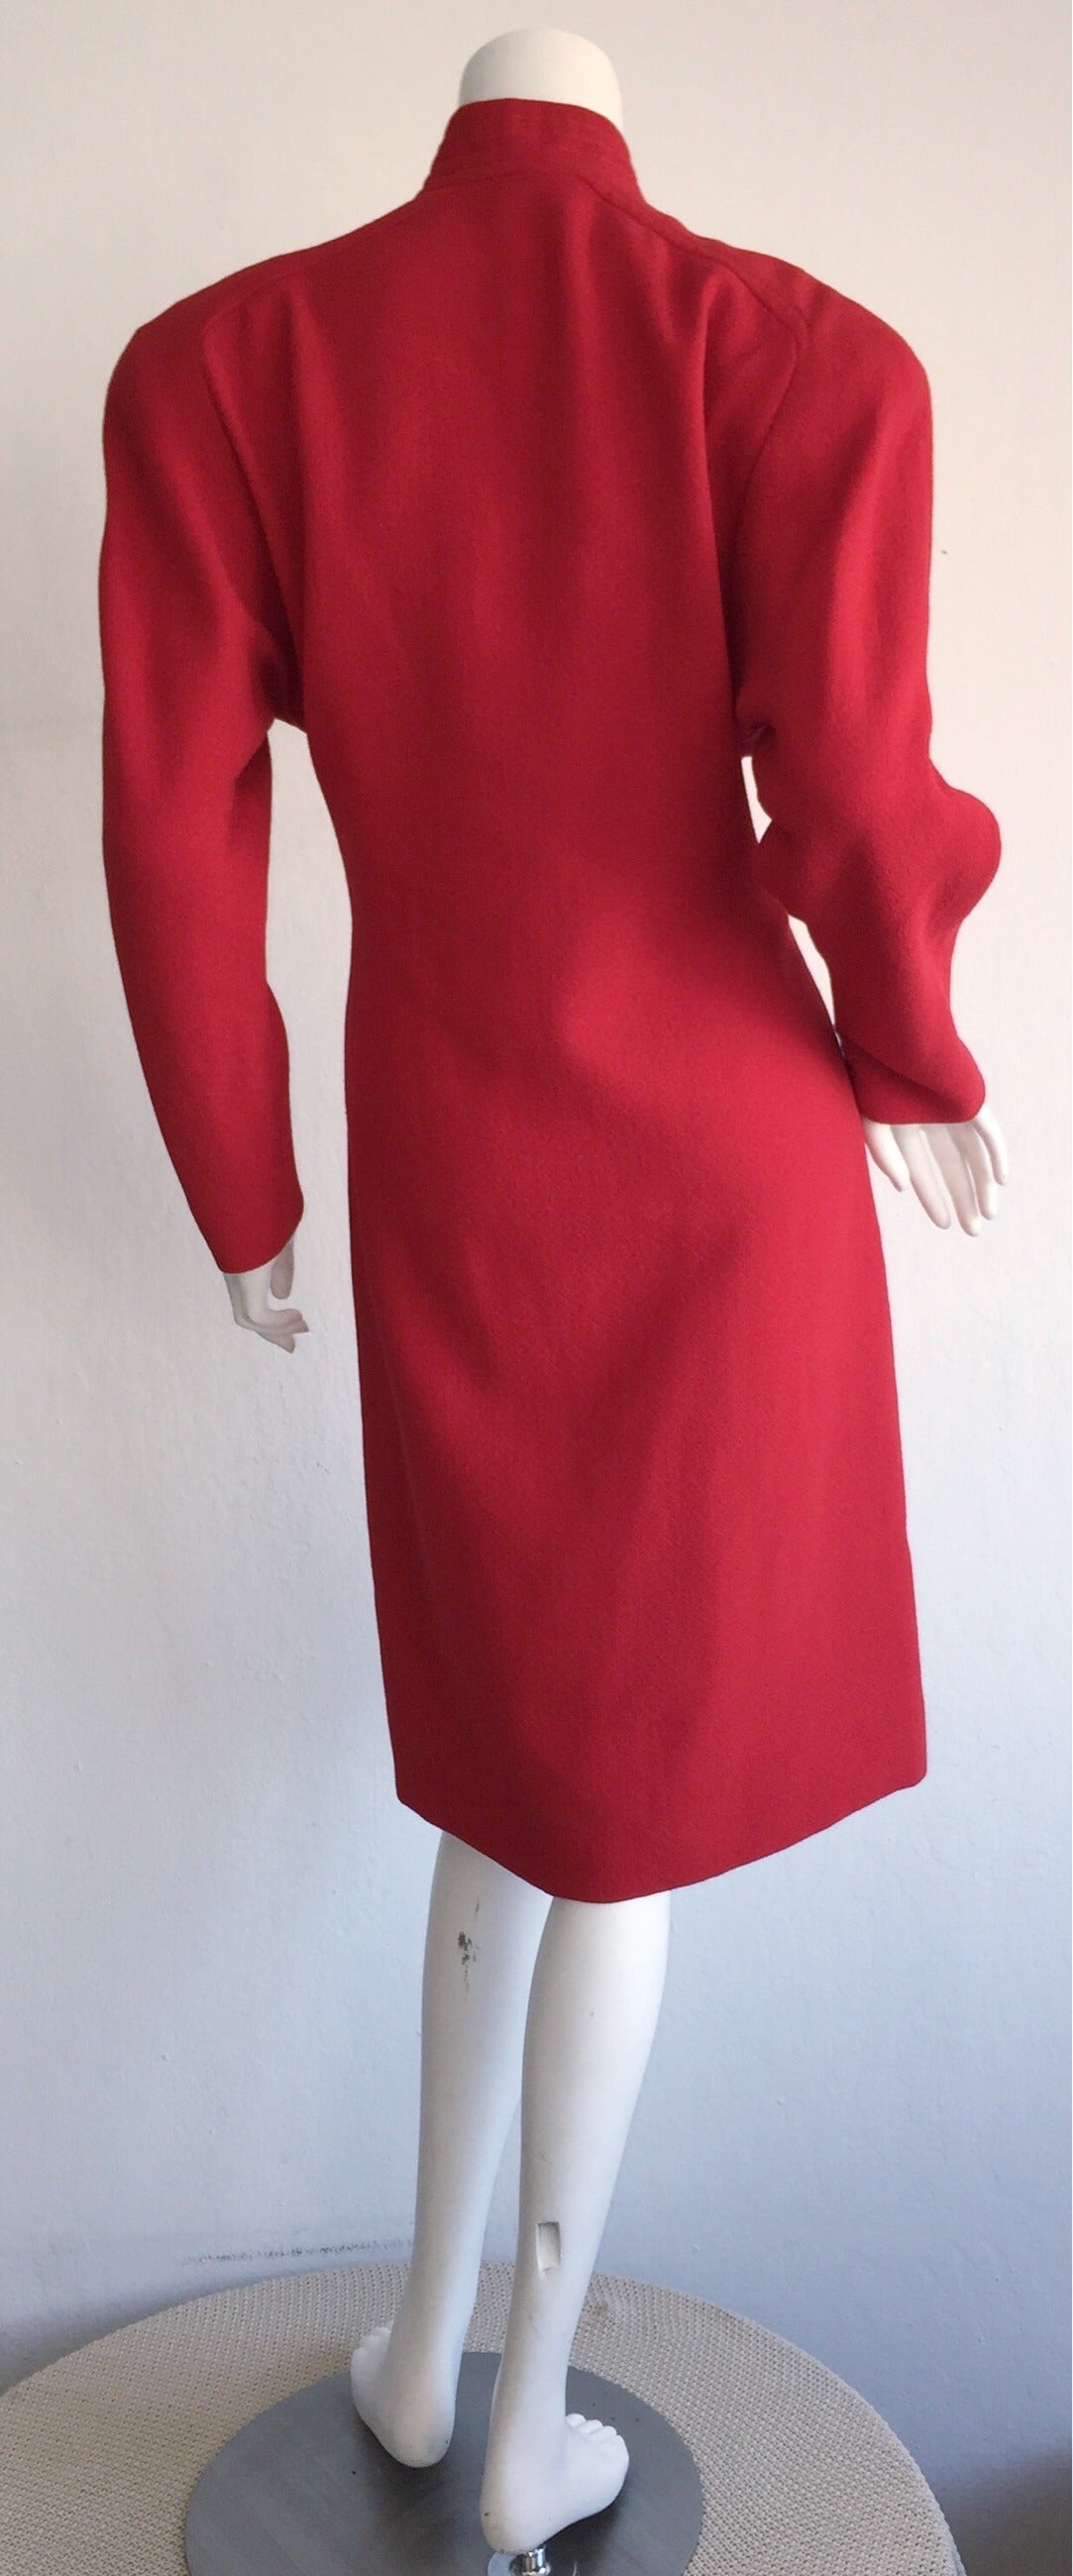 red dress with gold buttons